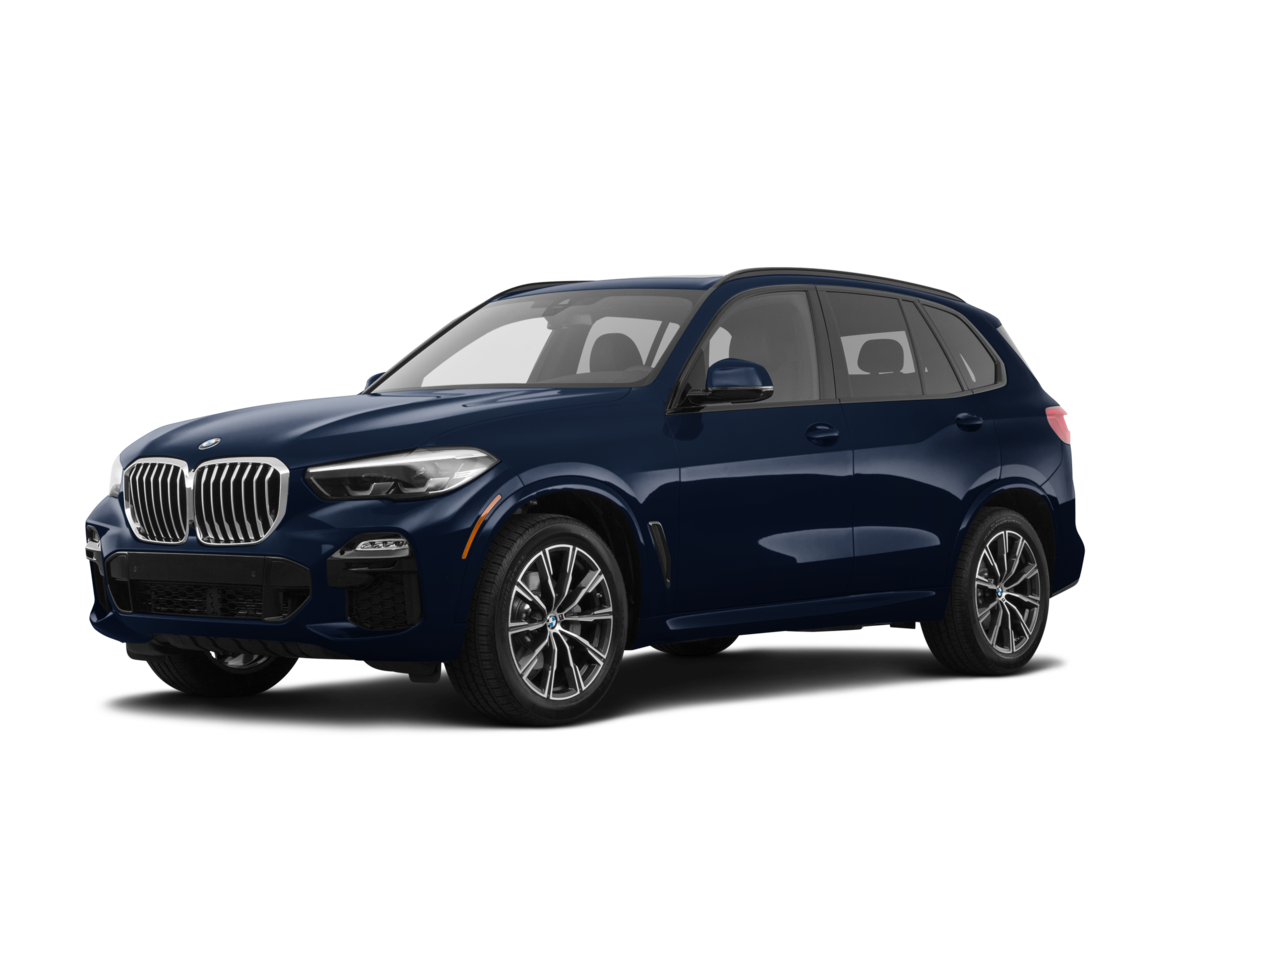 BMW X5 PNG Clipart Background